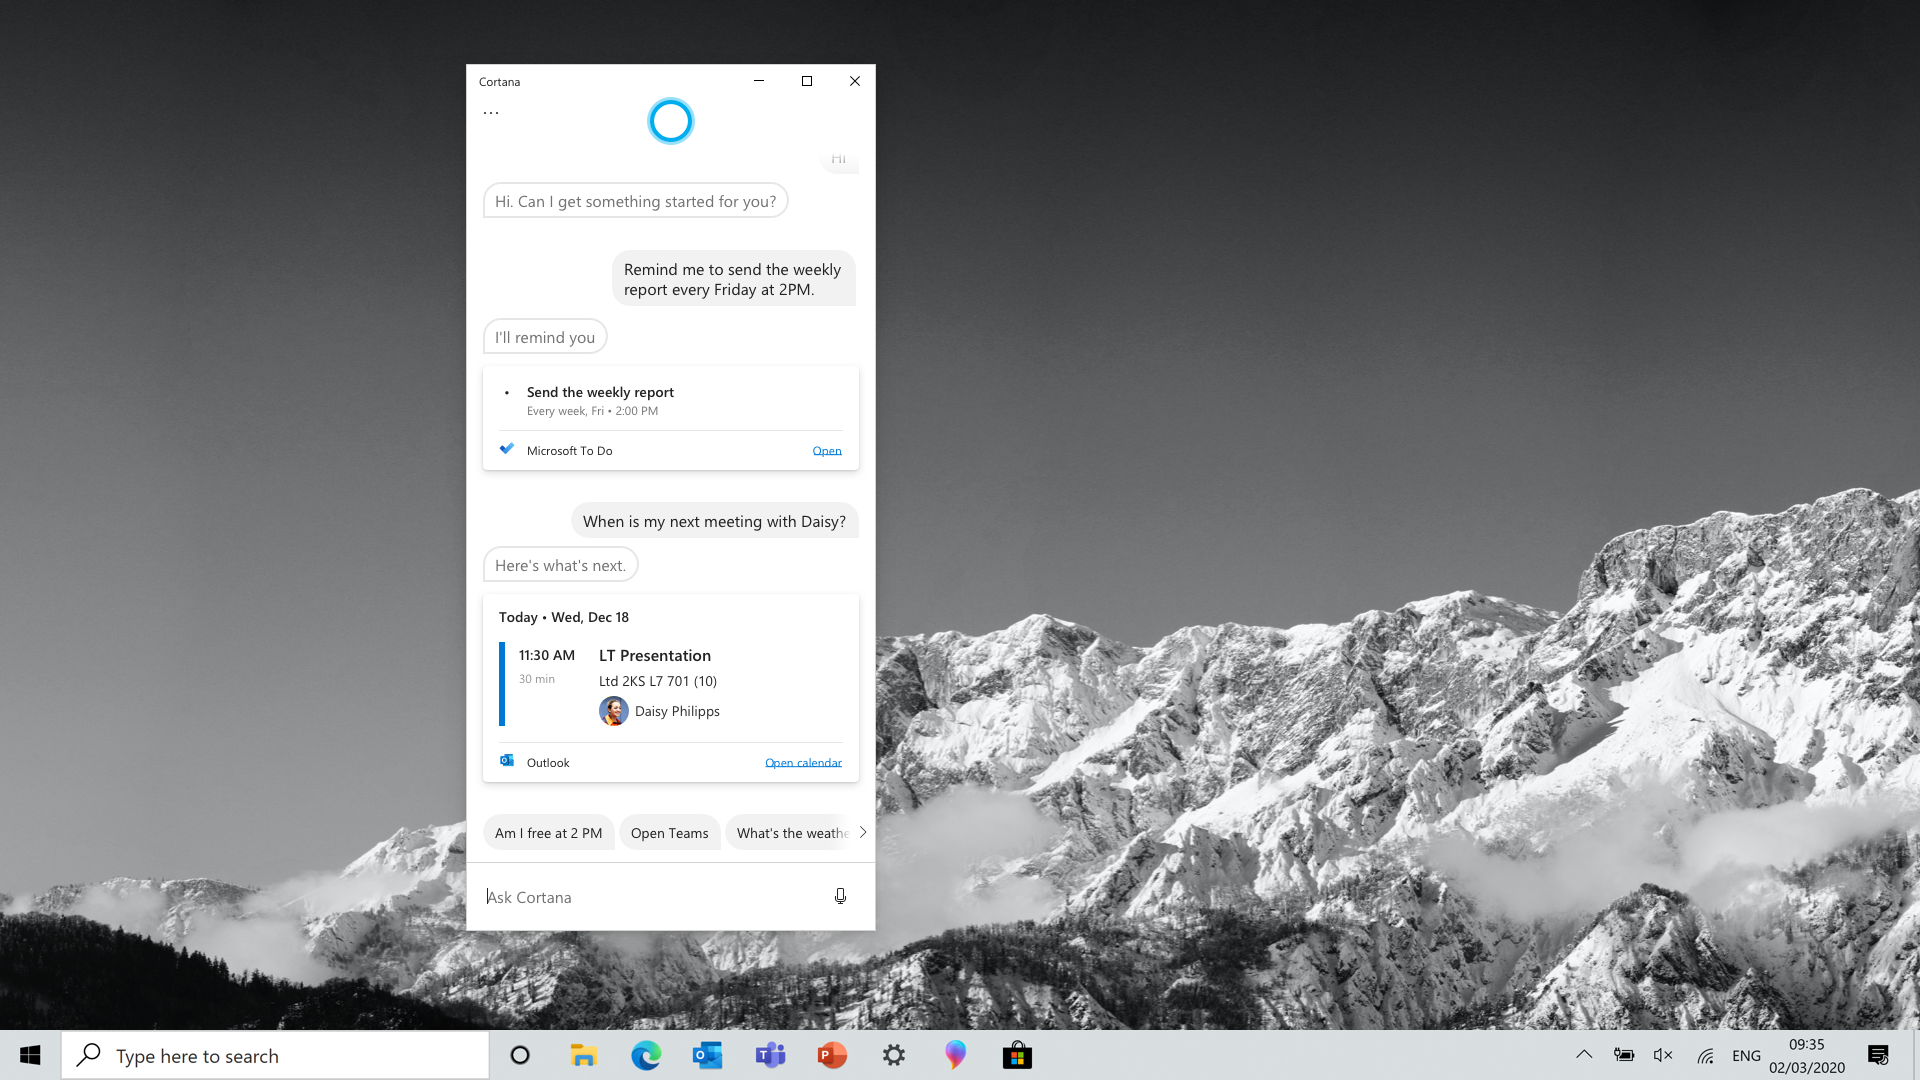 If you want to enable Cortana, double-click on Allow Cortana and select Enabled. Then click Apply and OK.
If you want to disable Cortana, double-click on Allow Cortana and select Disabled. Then click Apply and OK.